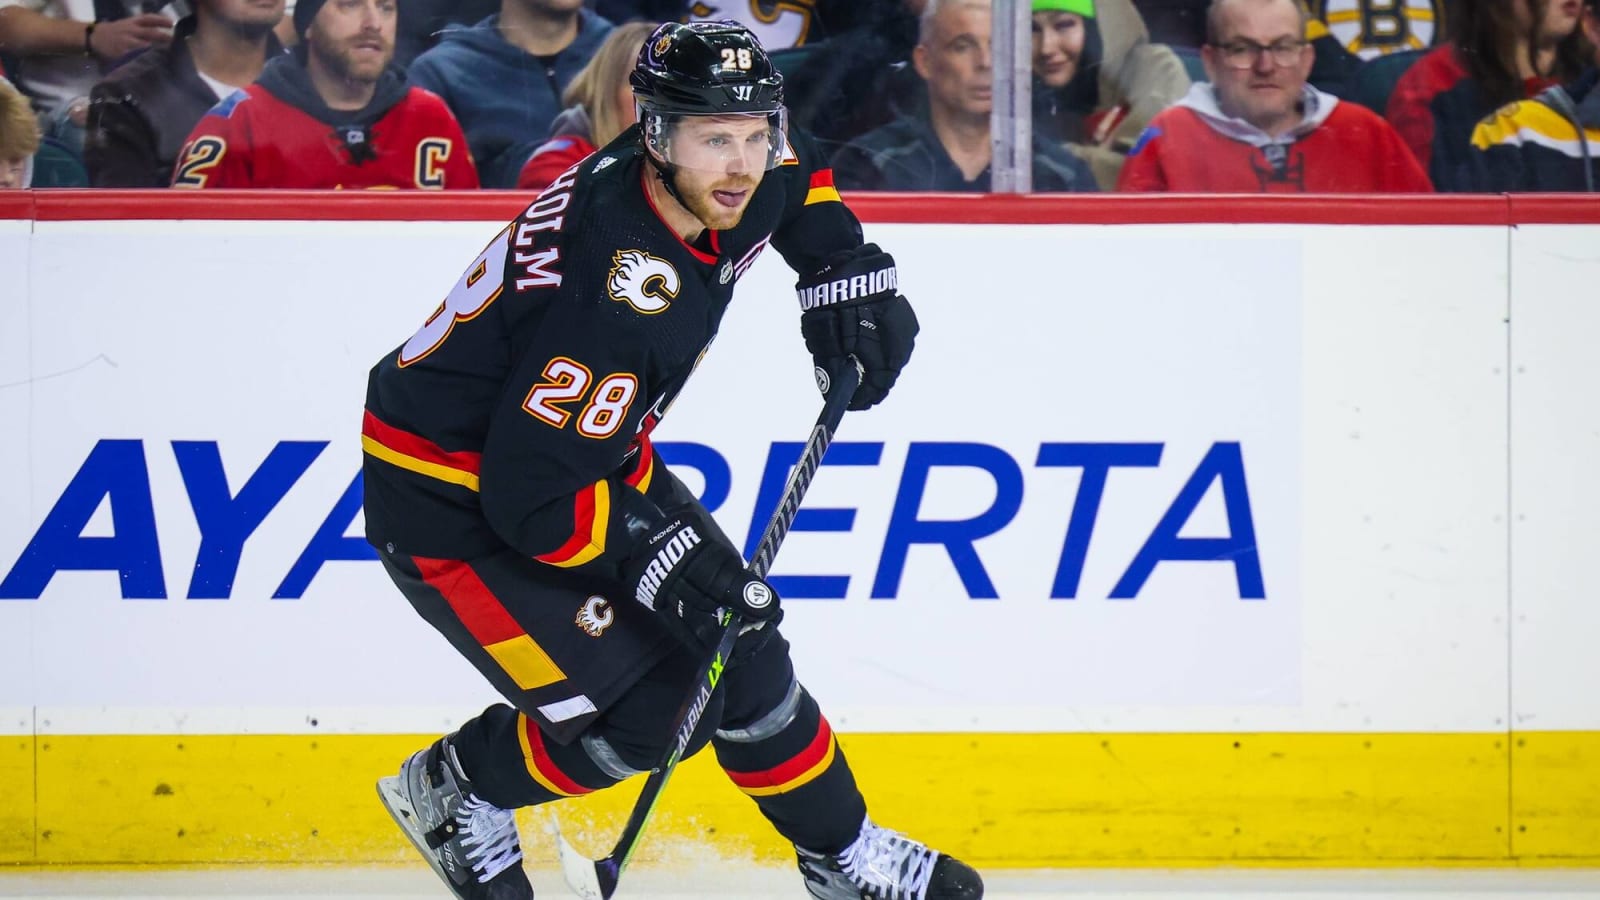 The Calgary Flames could see off-season changes as key players weigh their futures